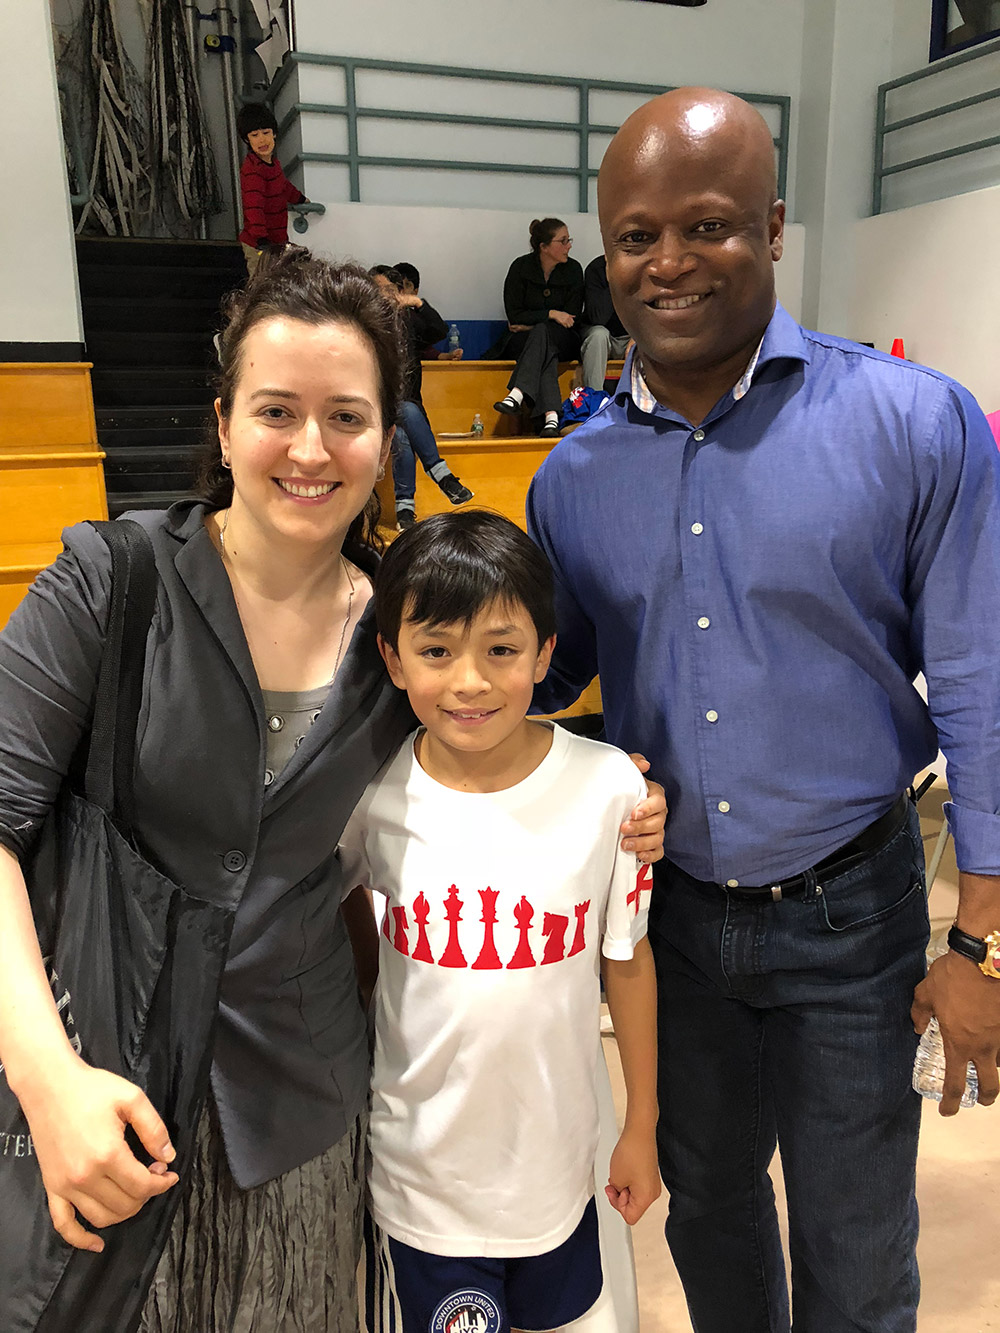 Oliver with GM Maurice Ashley and GM Irina Krush at the Charity Chess Championship in New York City. May, 2018